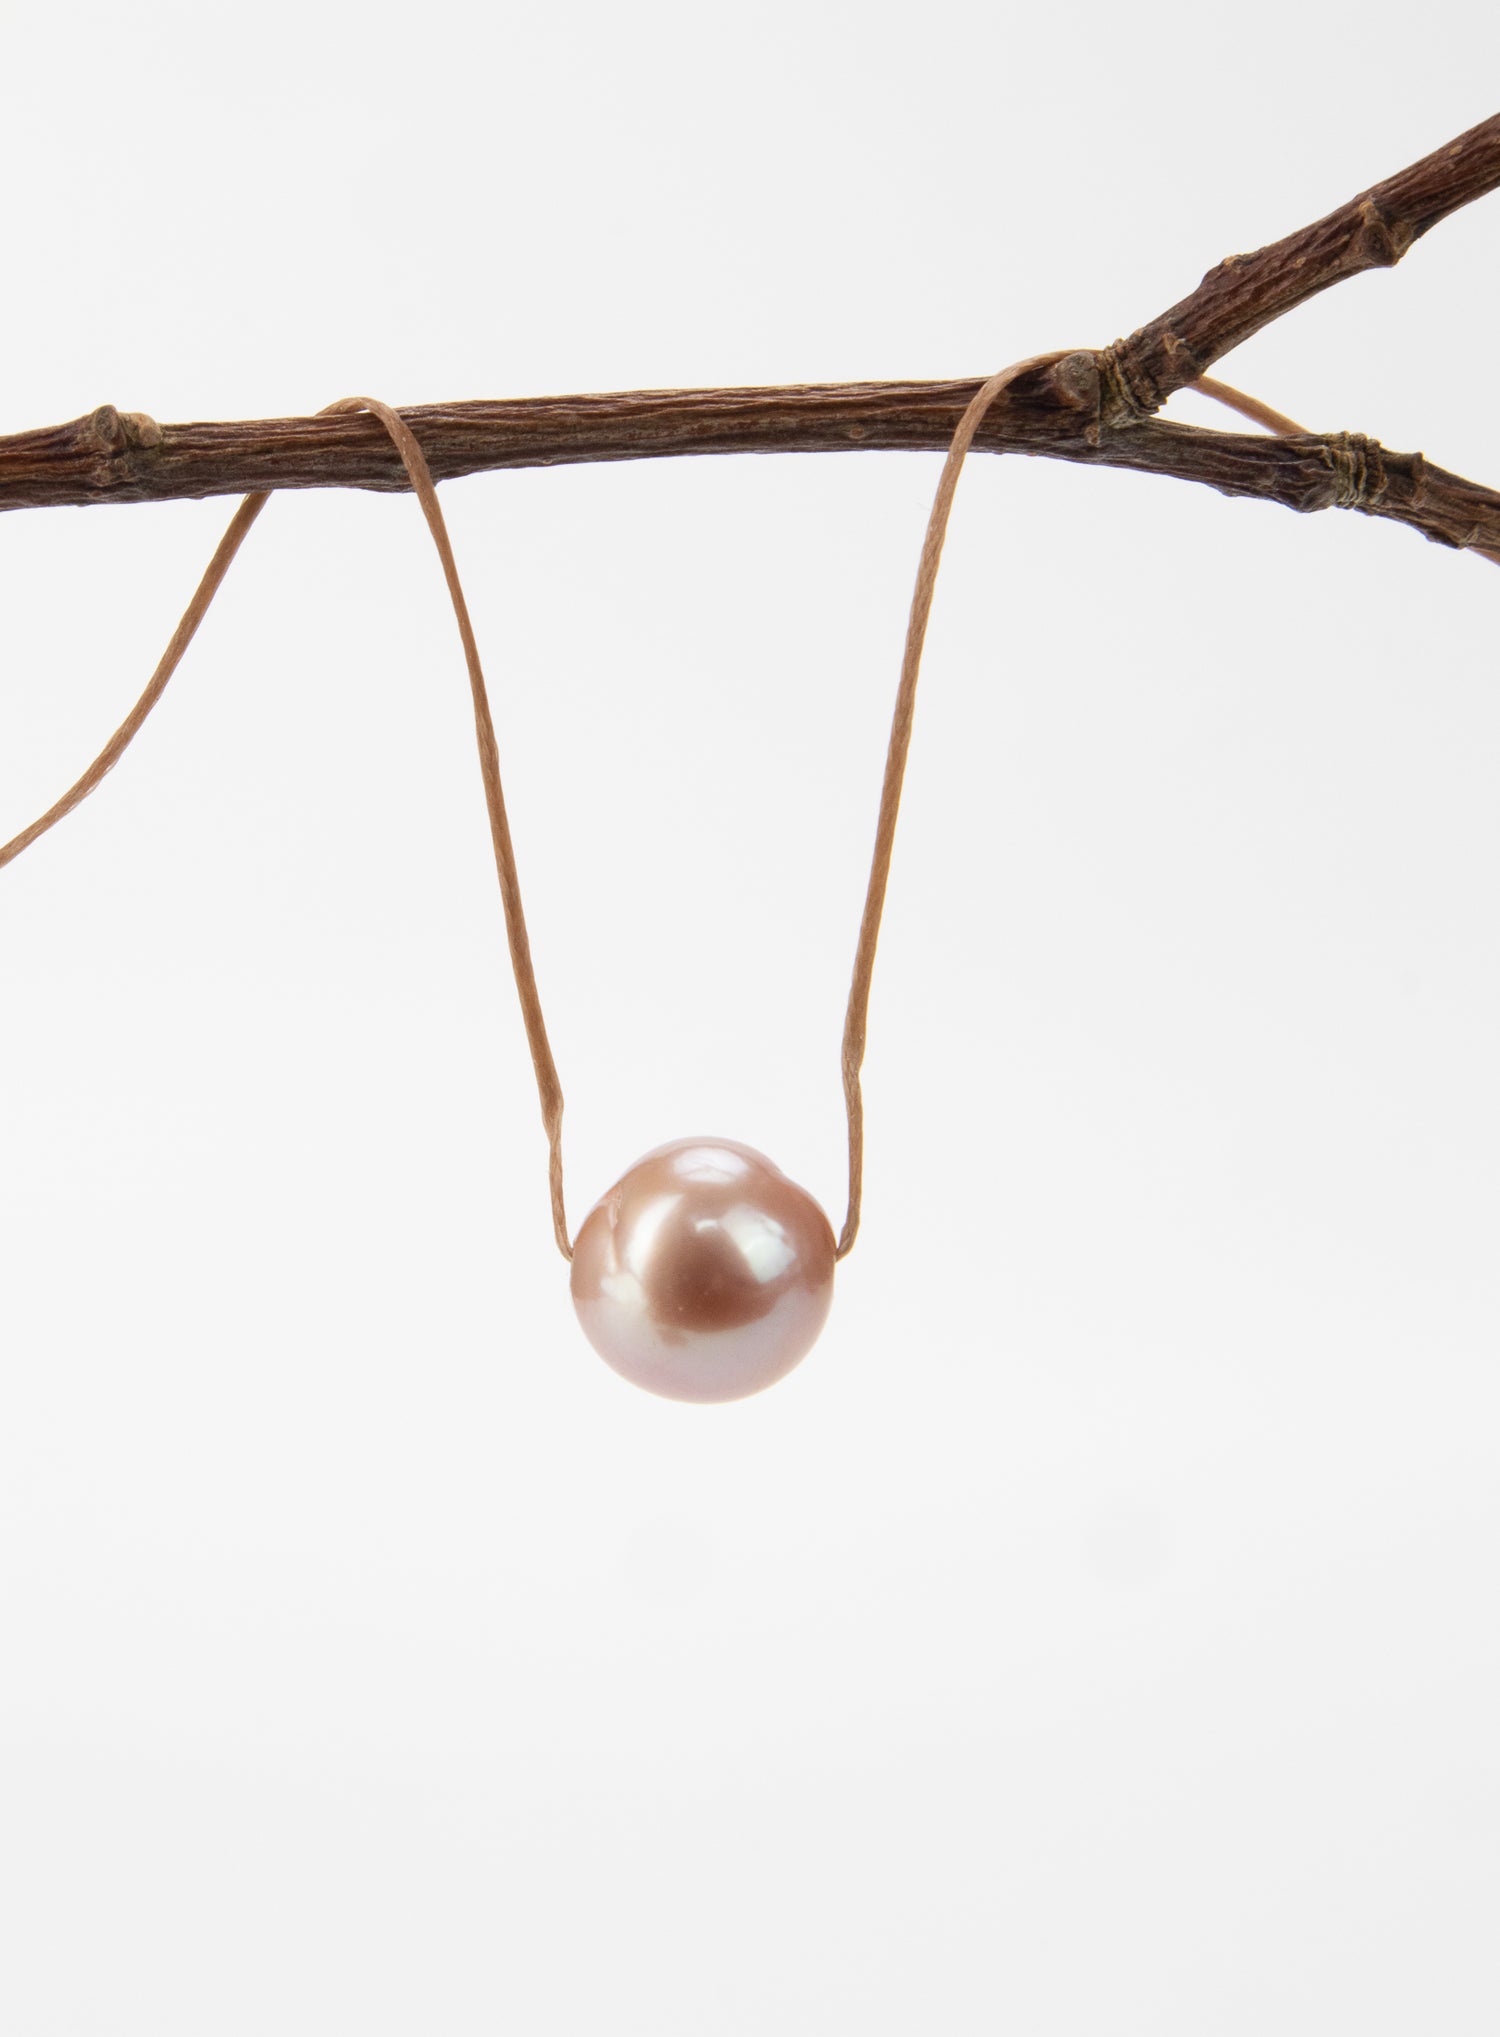 For Mum, you are a real pearl - Hazelnut Necklace